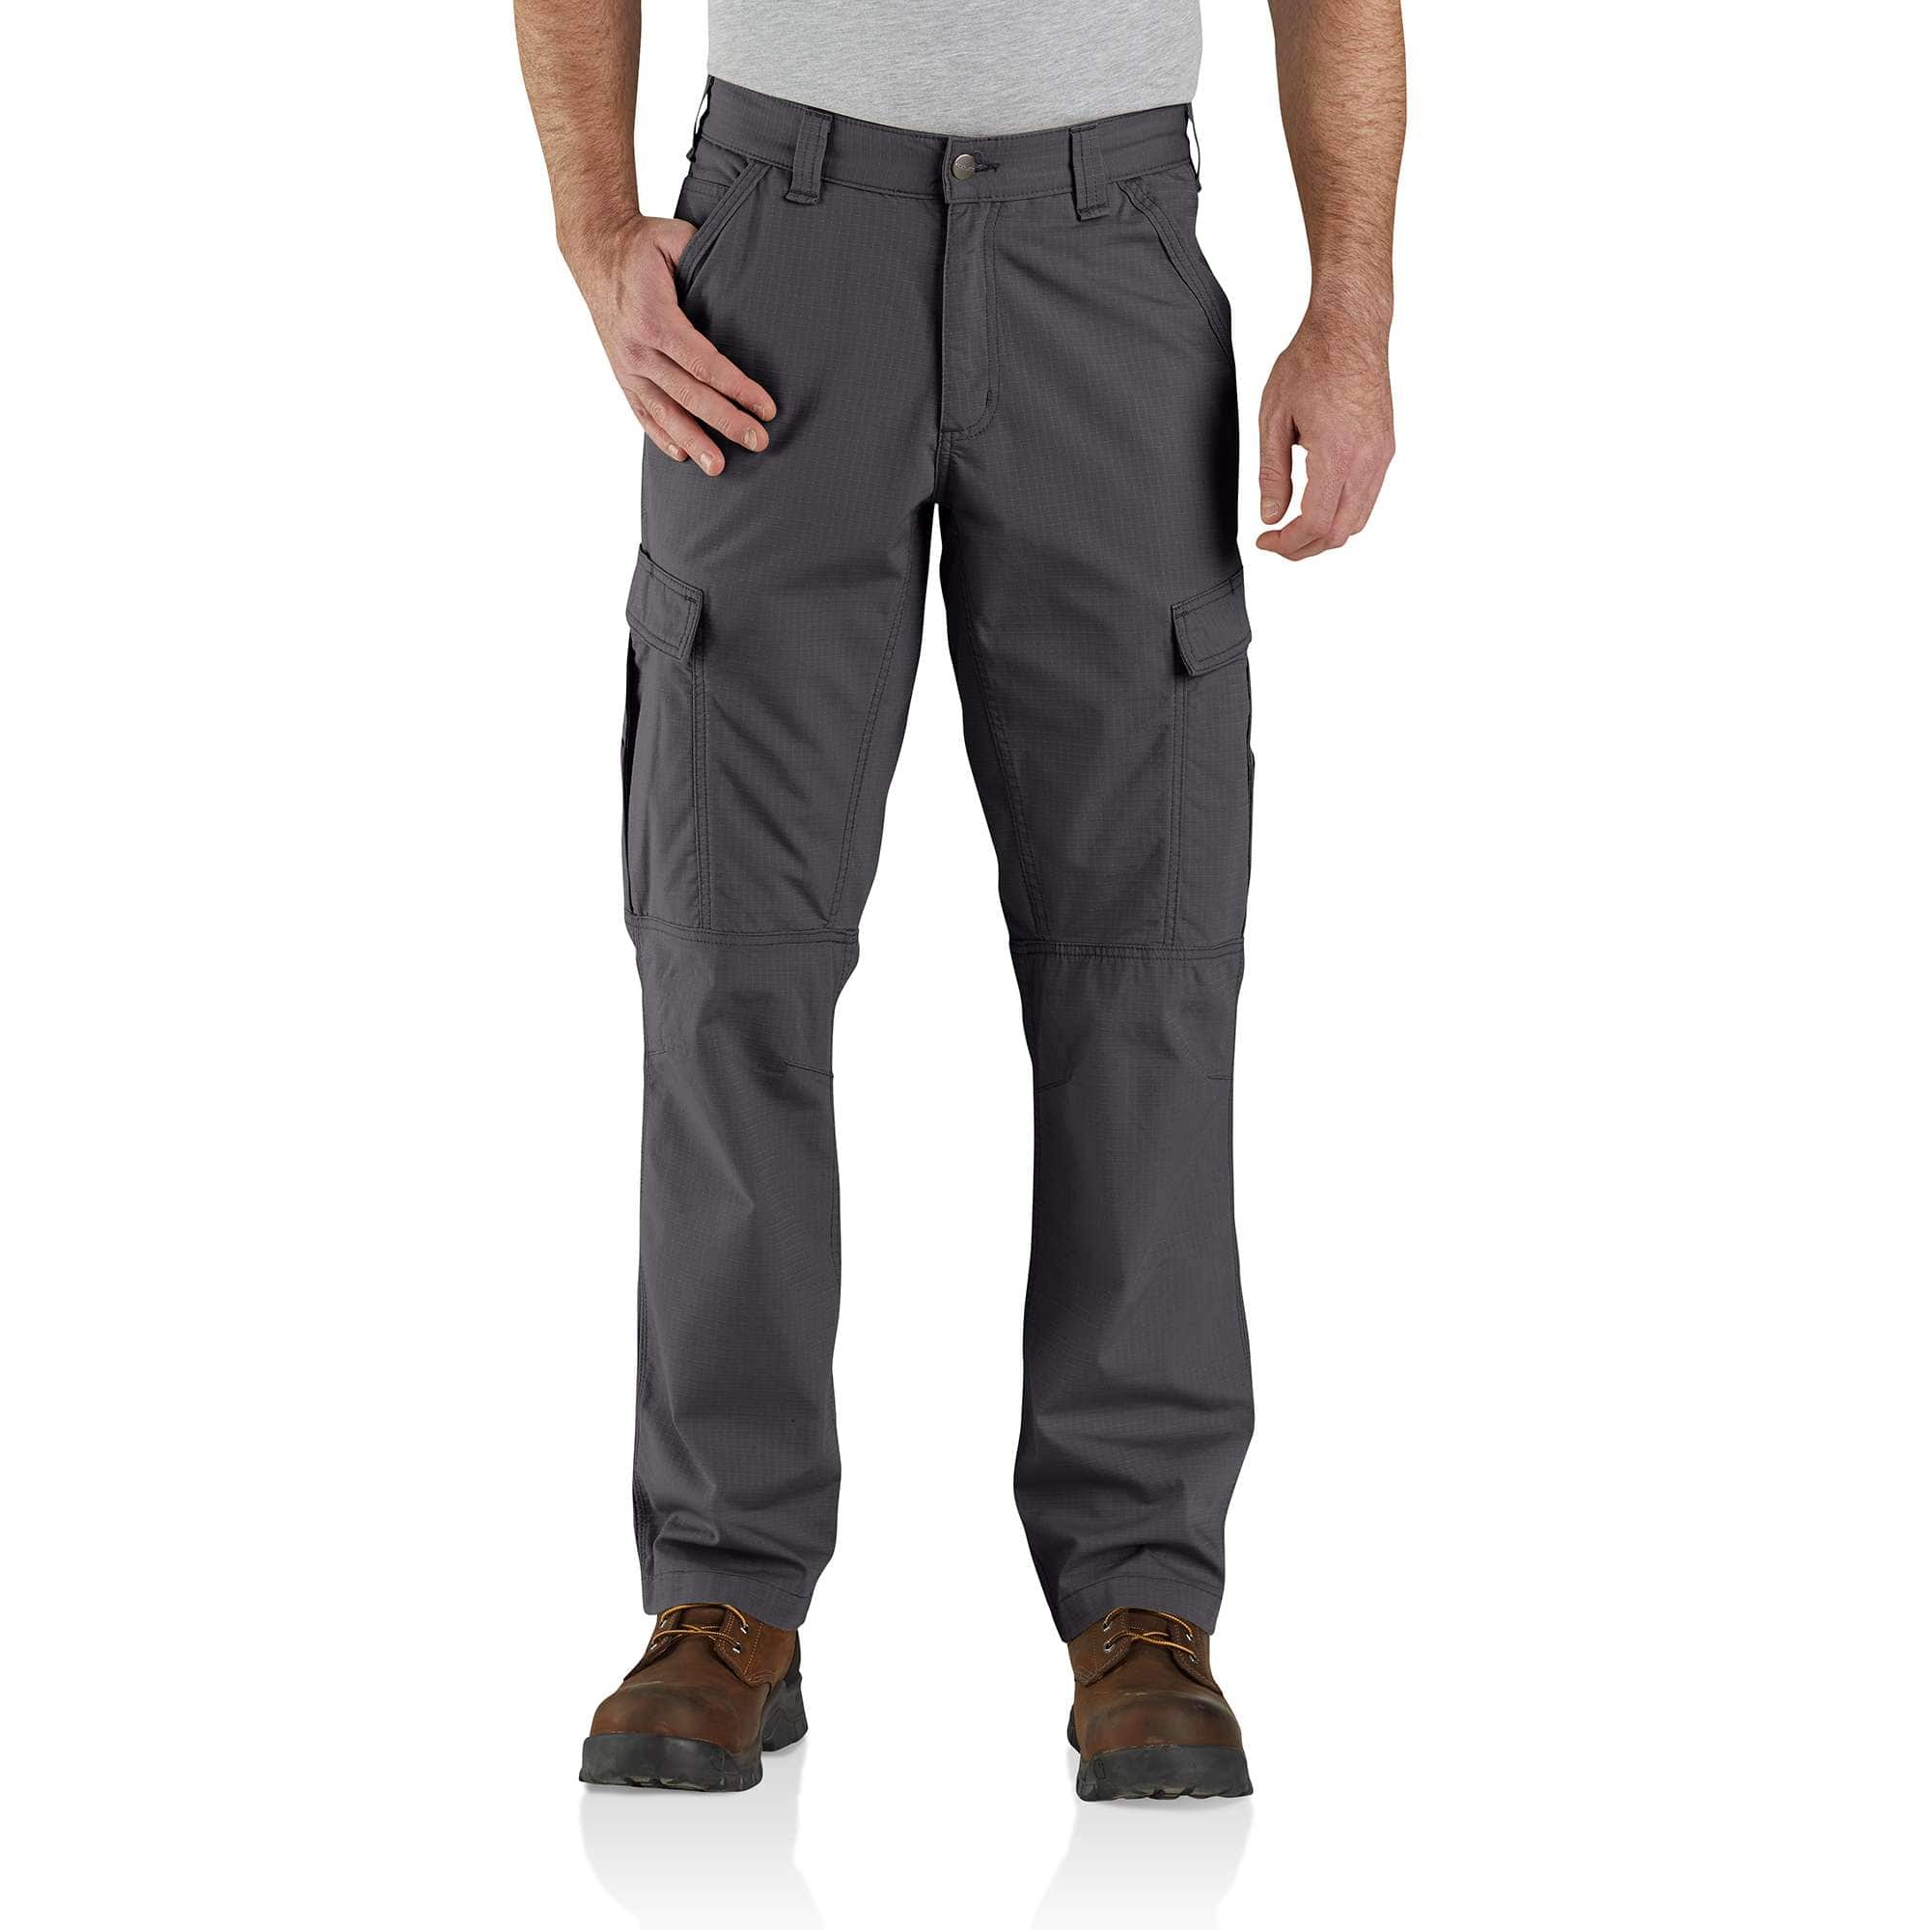 Carhartt Men's 28 in. x 32 in. Hickory Cotton/Spandex Rf Relaxed